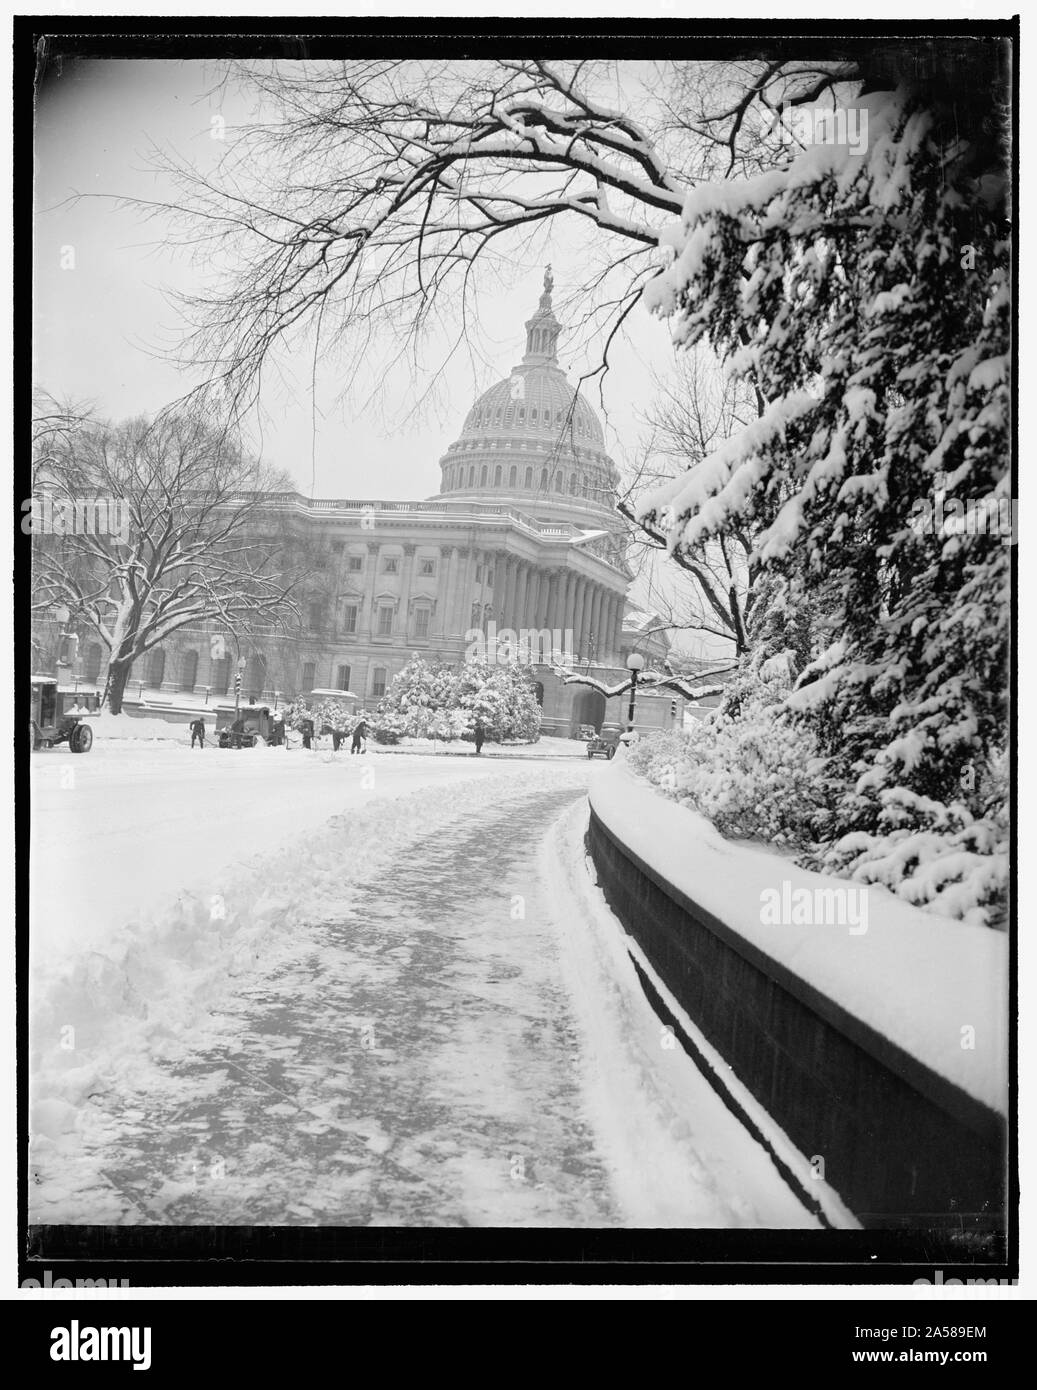 Washington whitened by heaviest snowfall in two years. Washington, D.C., Jan. 8. With a fall of 5.2 inches of snow, Washingtonians awoke this morning to find their Capital blanketed by the heaviest snowfall since 1938. This is a scene on Capitol Hill Stock Photo